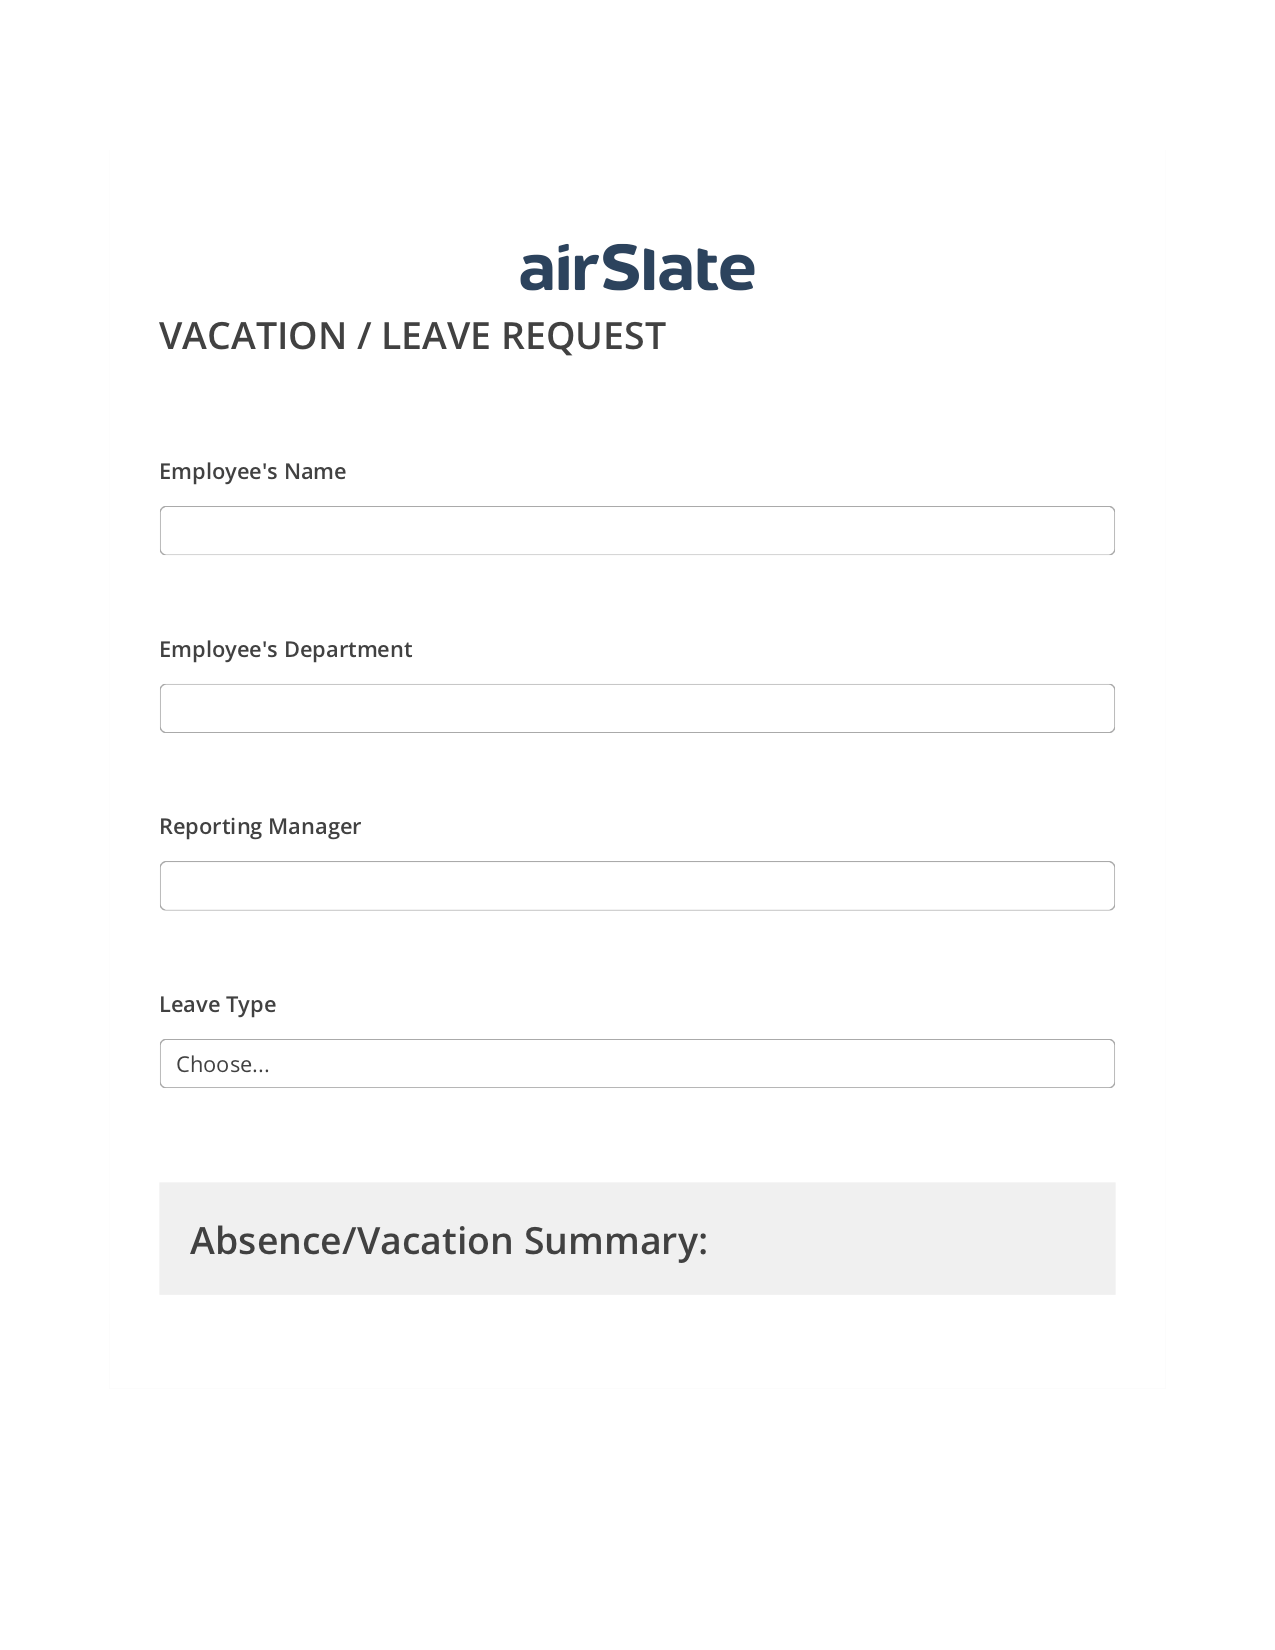 Vacation/Leave Request Workflow Pre-fill from CSV File Bot, Remove Slate Bot, Archive to Dropbox Bot